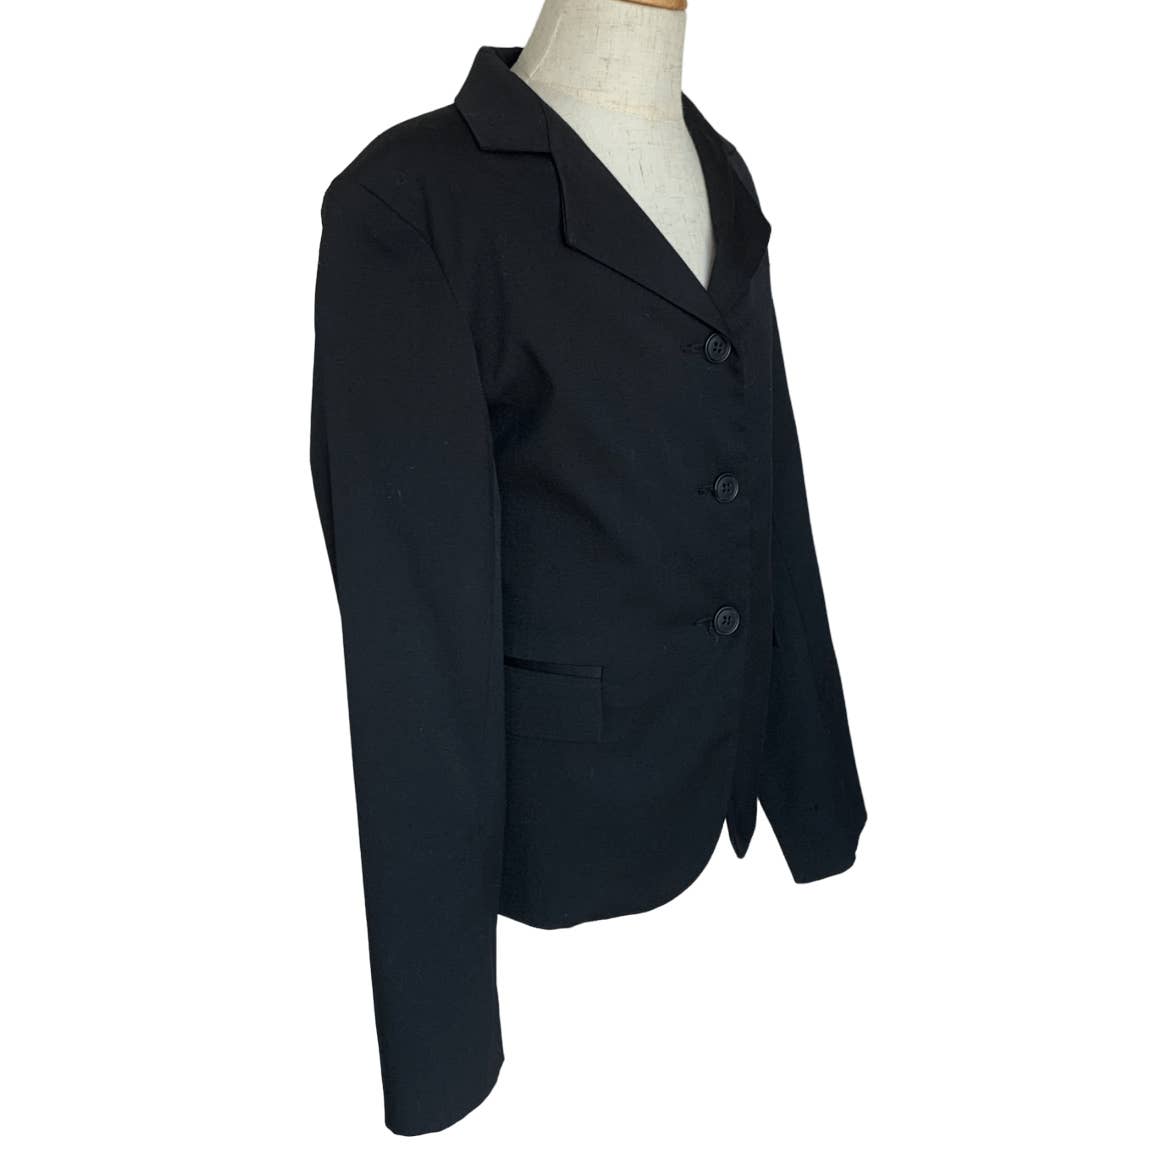 Devon-Aire Classic Show Jacket in Black - Youth 12